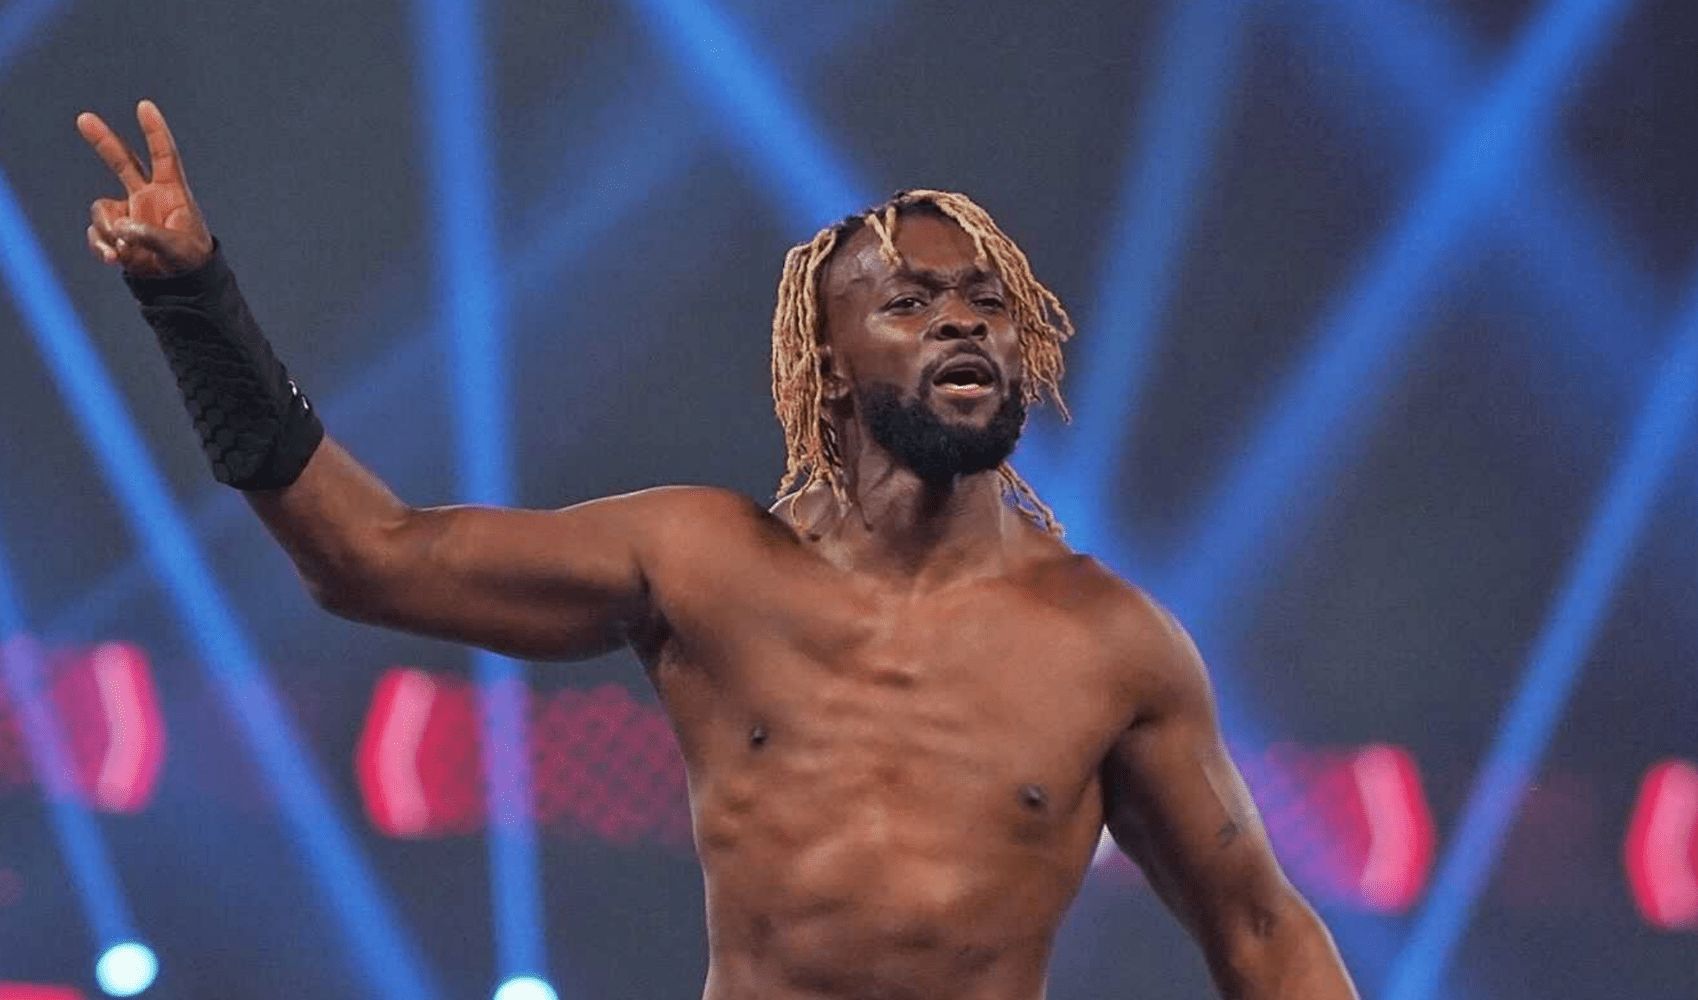 Kofi Kingston has been a valued member of the roster for several years.